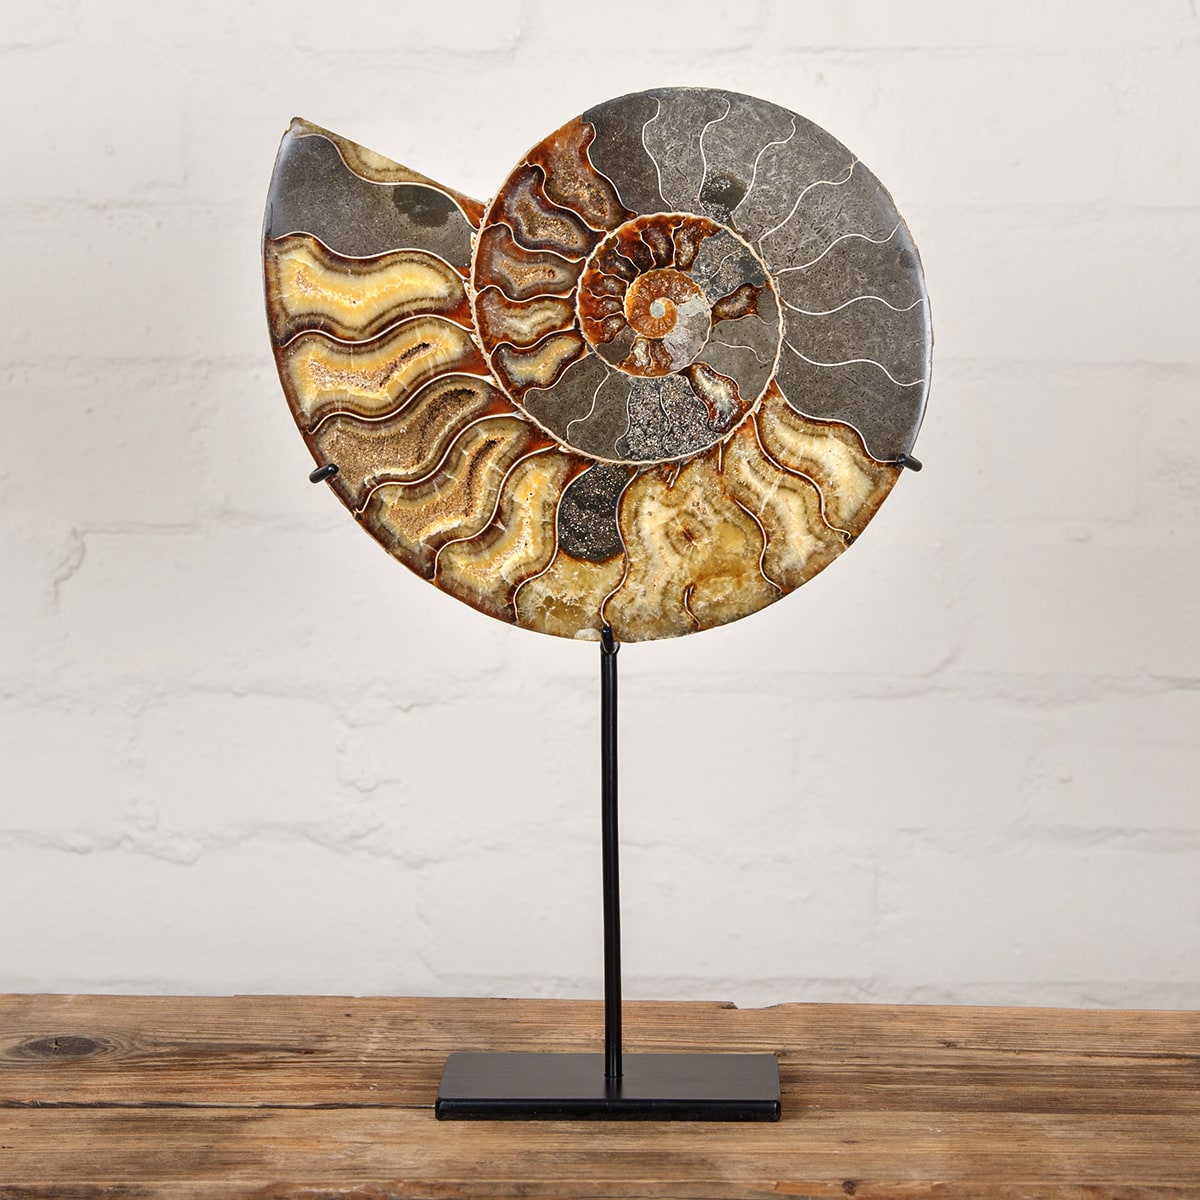 Minibeast Huge 9.4 inch Polished & Sliced Ammonite Fossil on Stand (Cleoniceras sp)